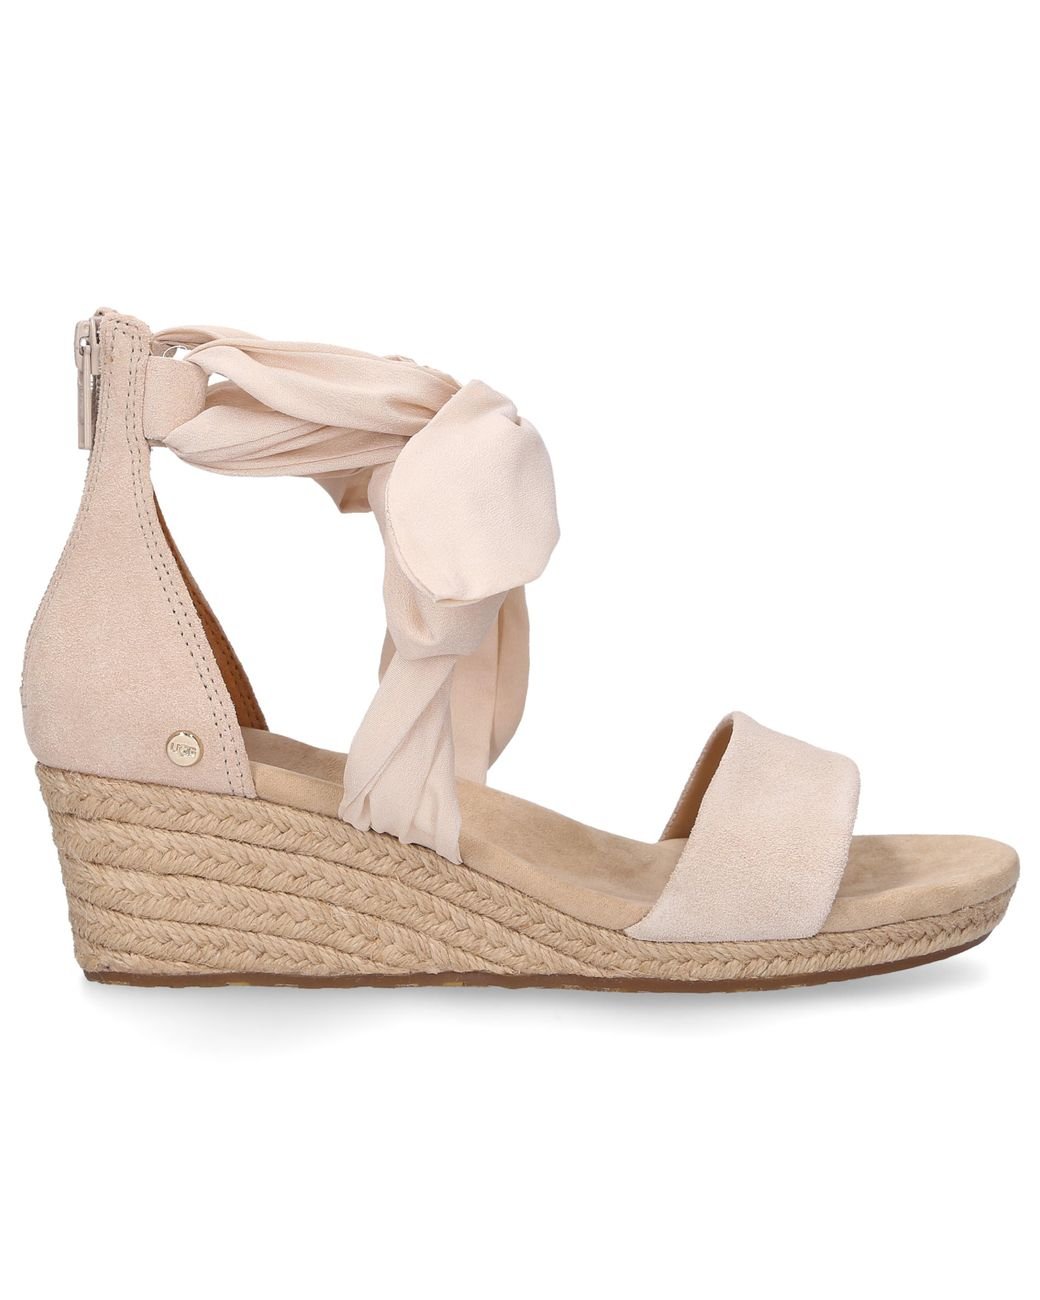 UGG Leather Wedge Sandals Trina Textile in Beige (Natural) | Lyst Canada